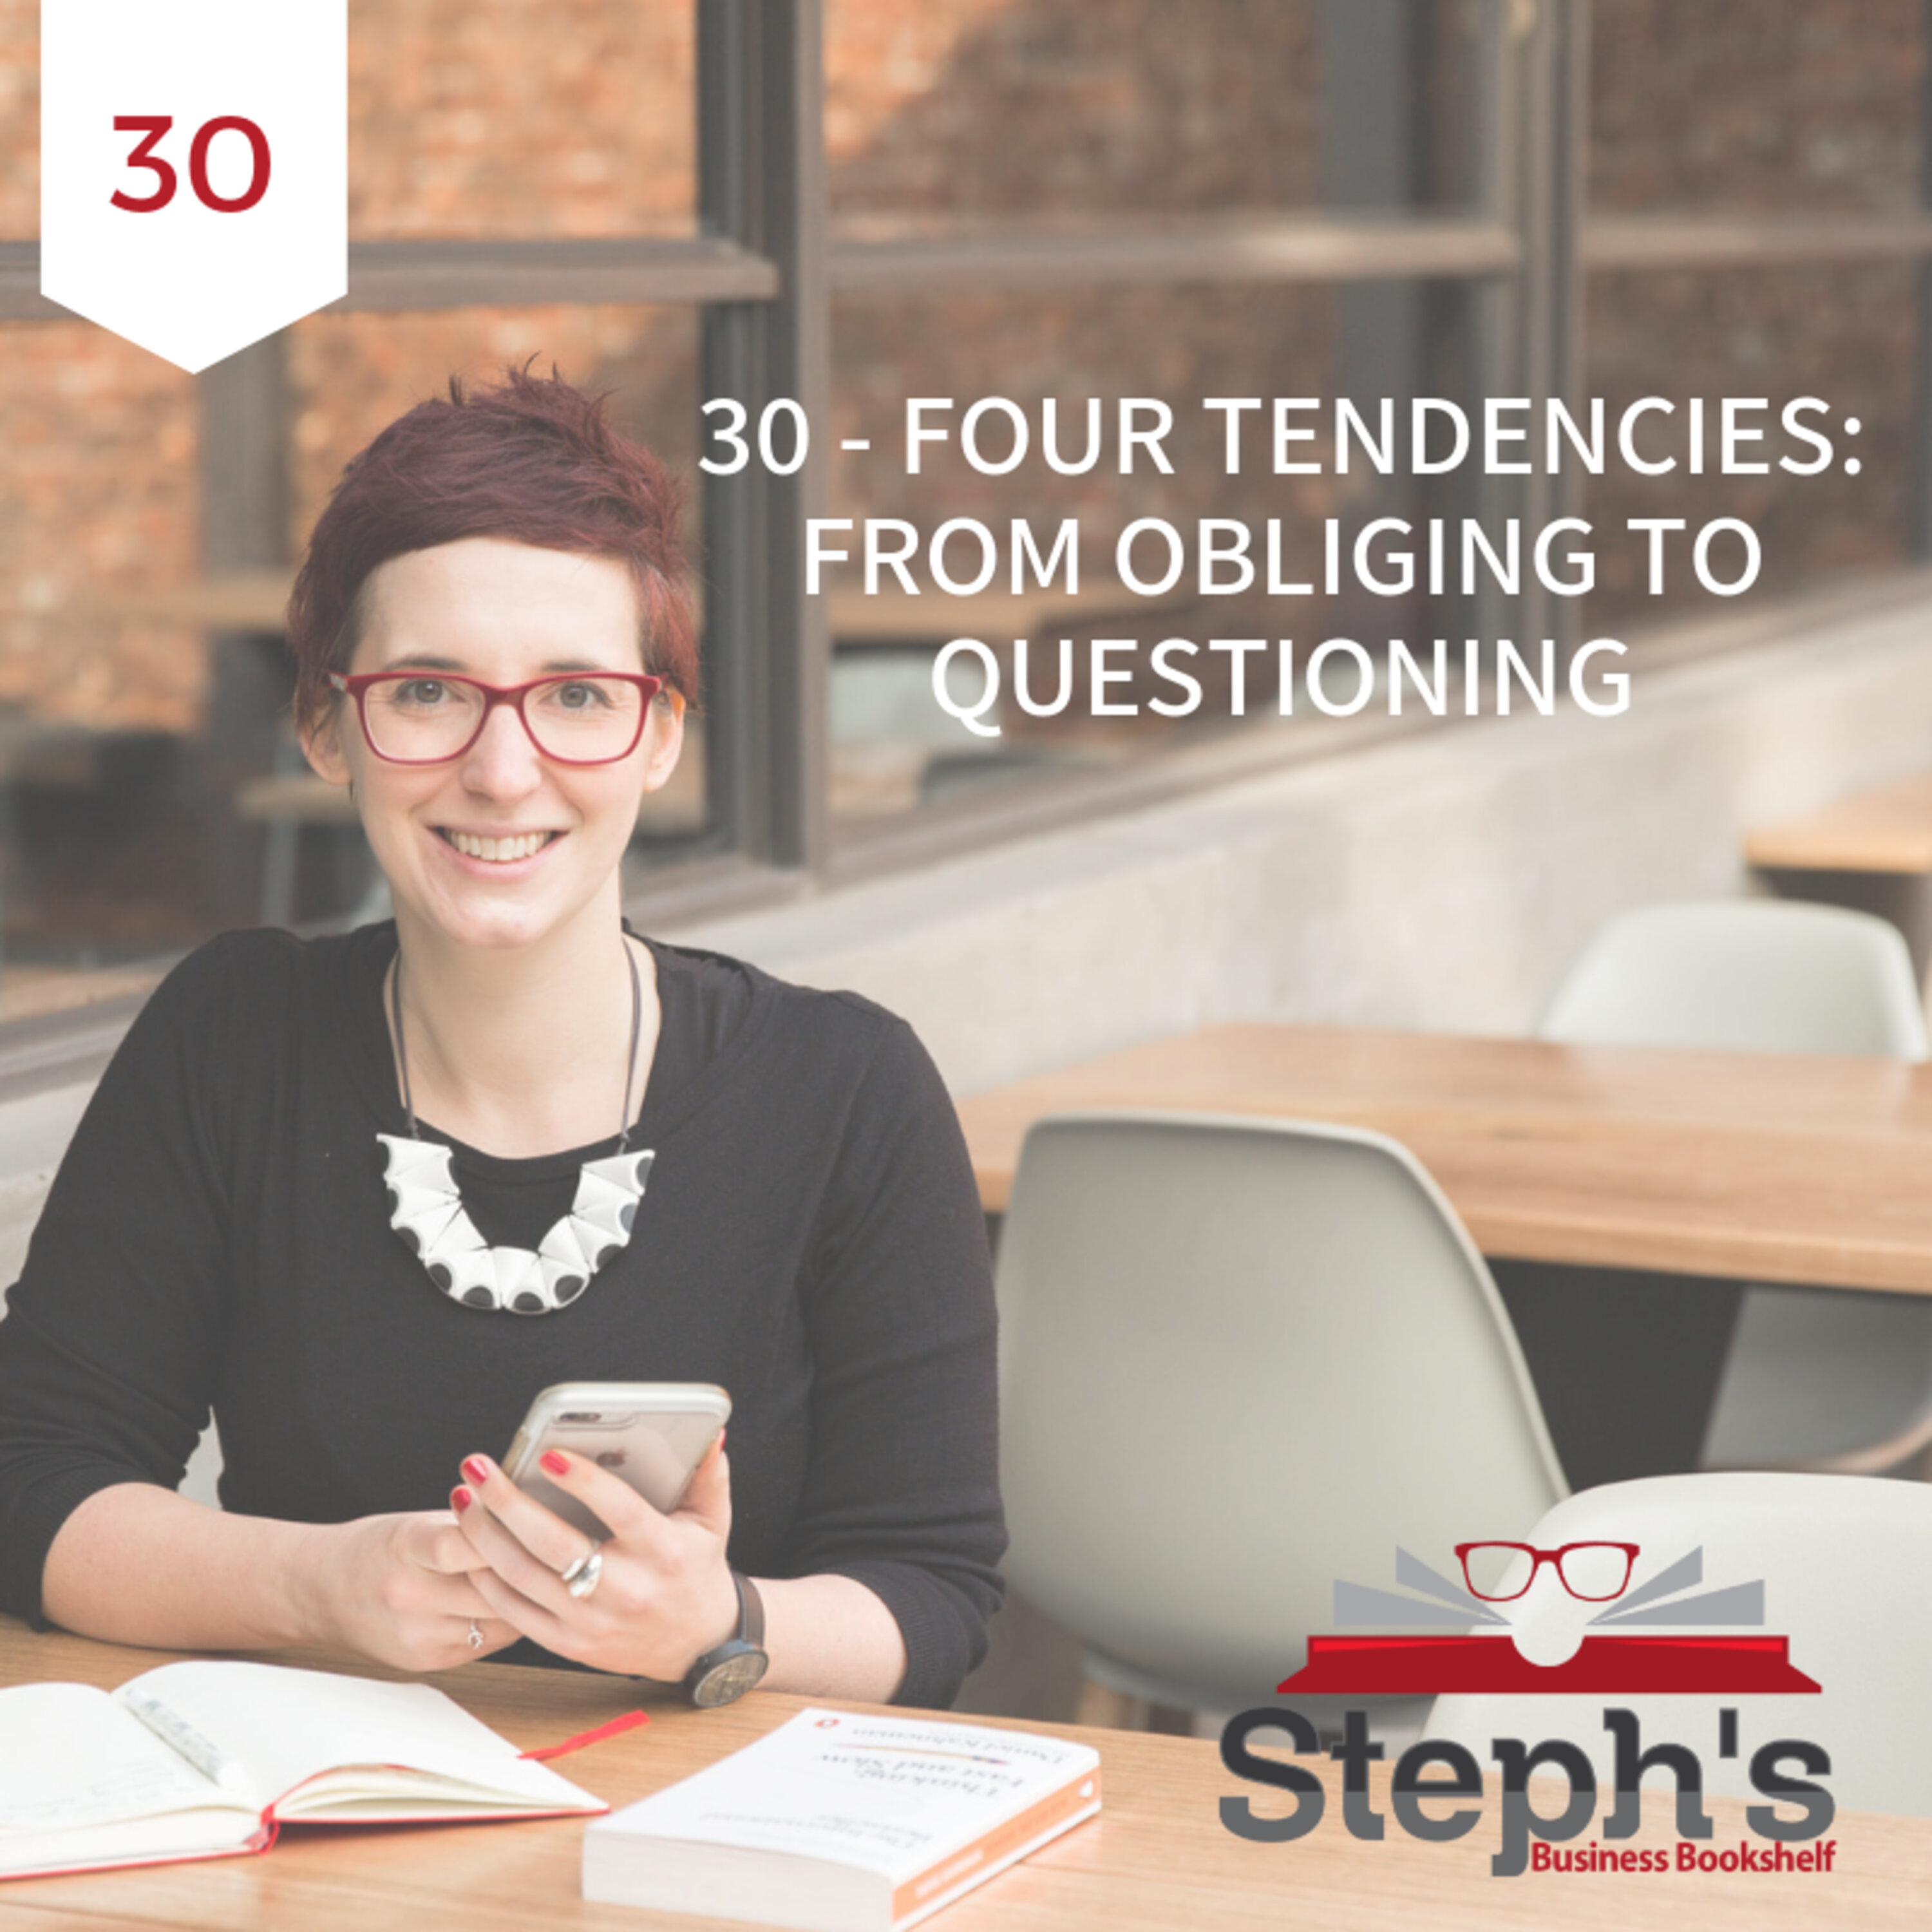 Four Tendencies by Gretchen Rubin: From Obliging to Questioning Image